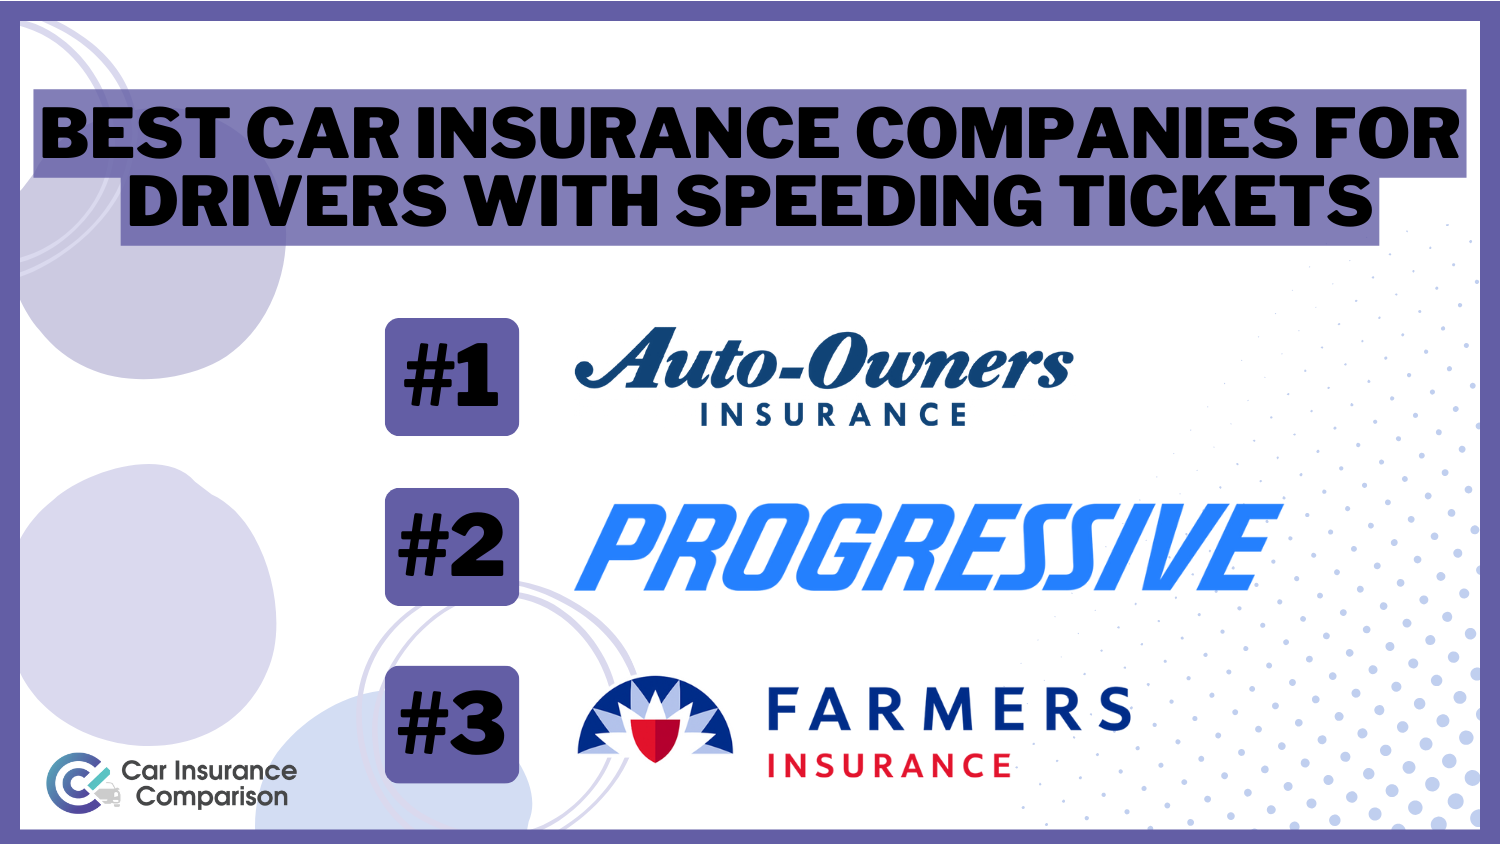 Auto-Owners, Progressive, Farmers: Best Car Insurance Companies for Drivers With Speeding Tickets